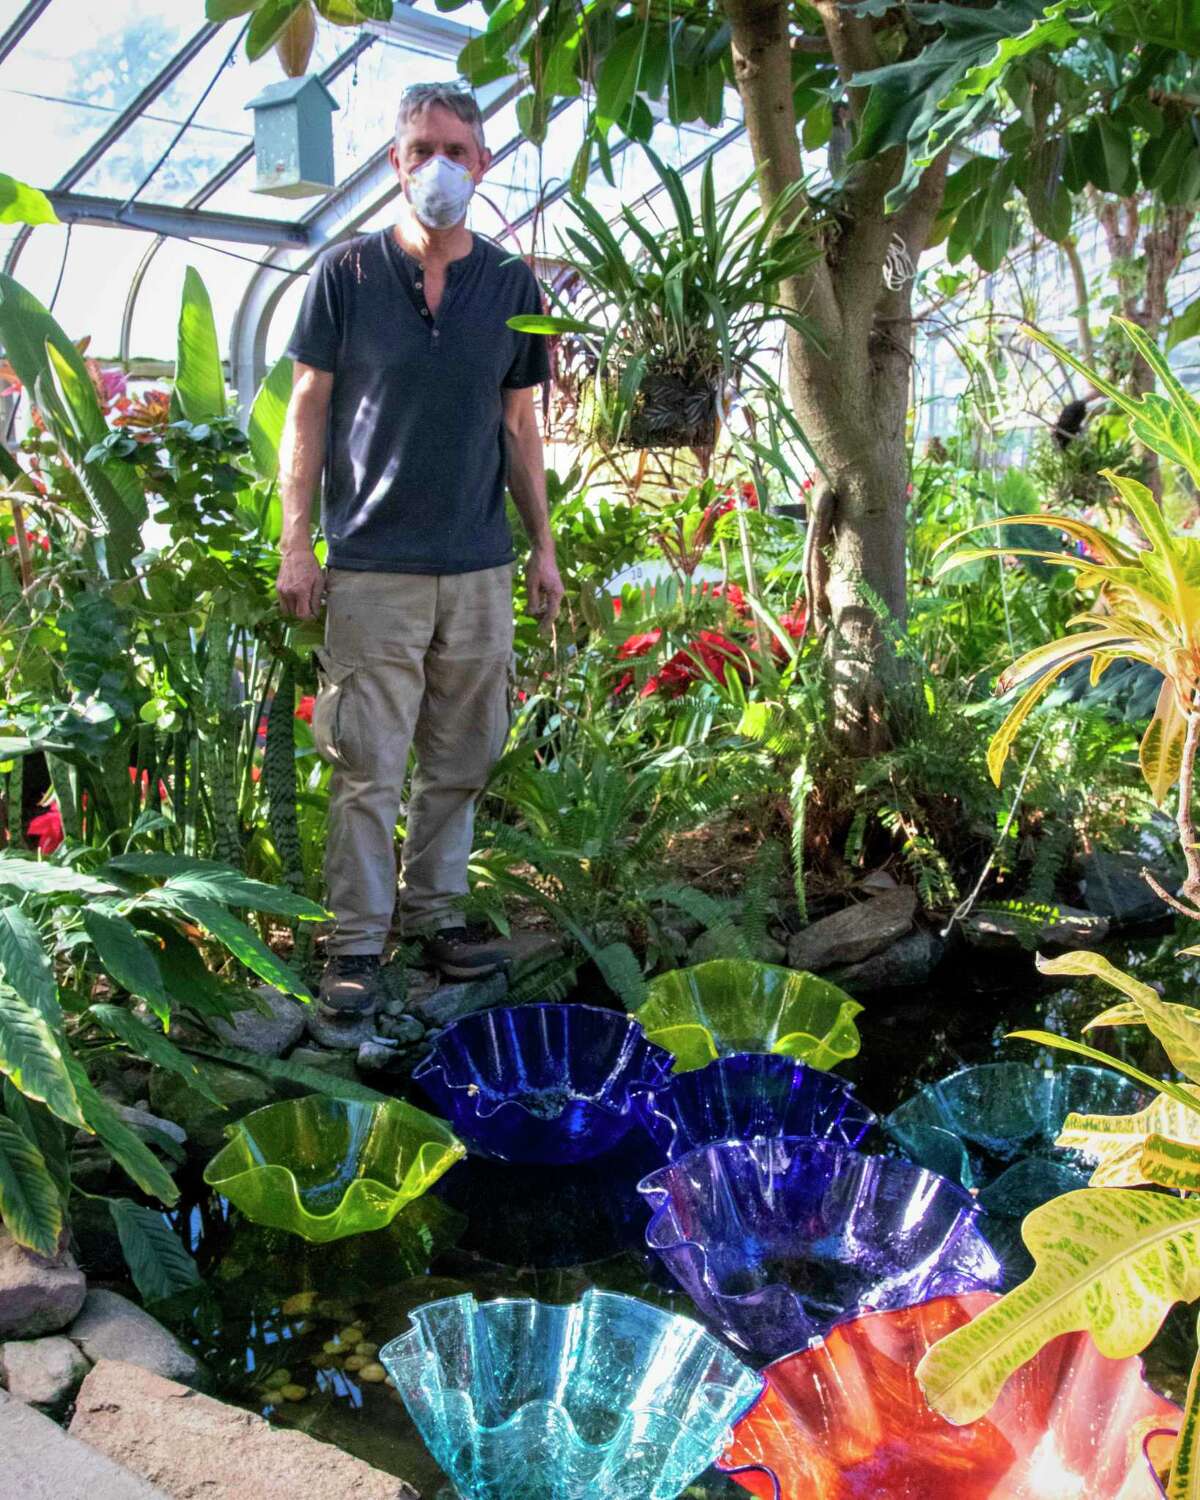 Artist Peter Greenwood sets up his exhibit “DAZZLE: A Garden of Glass” in the greenhouse at Connecticut's Beardsley Zoo in Bridgeport.